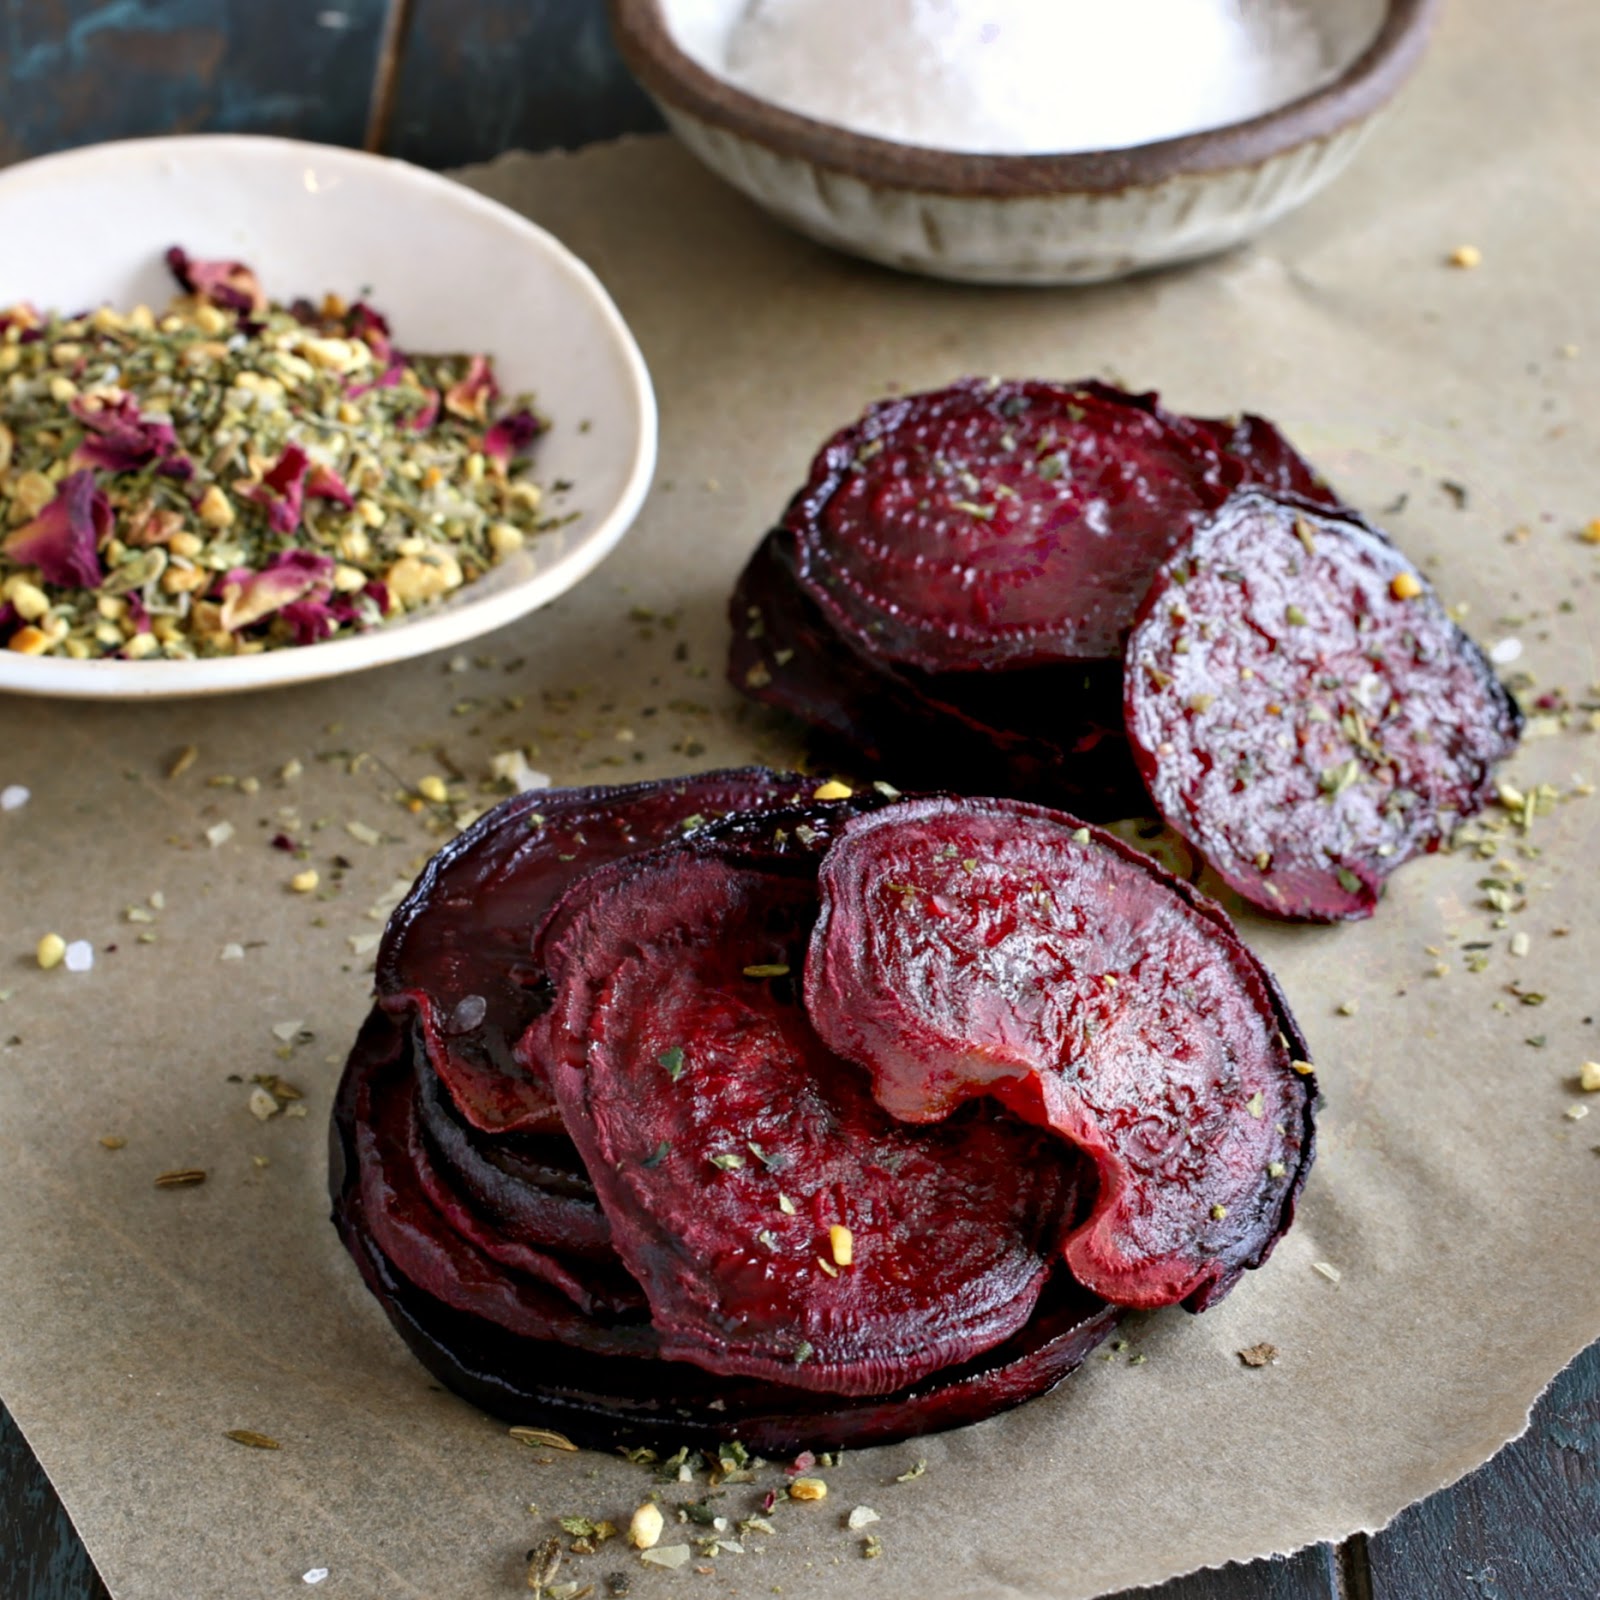 Crispy oven baked beet chips dusted with a mix of toasted pistachio and spices.